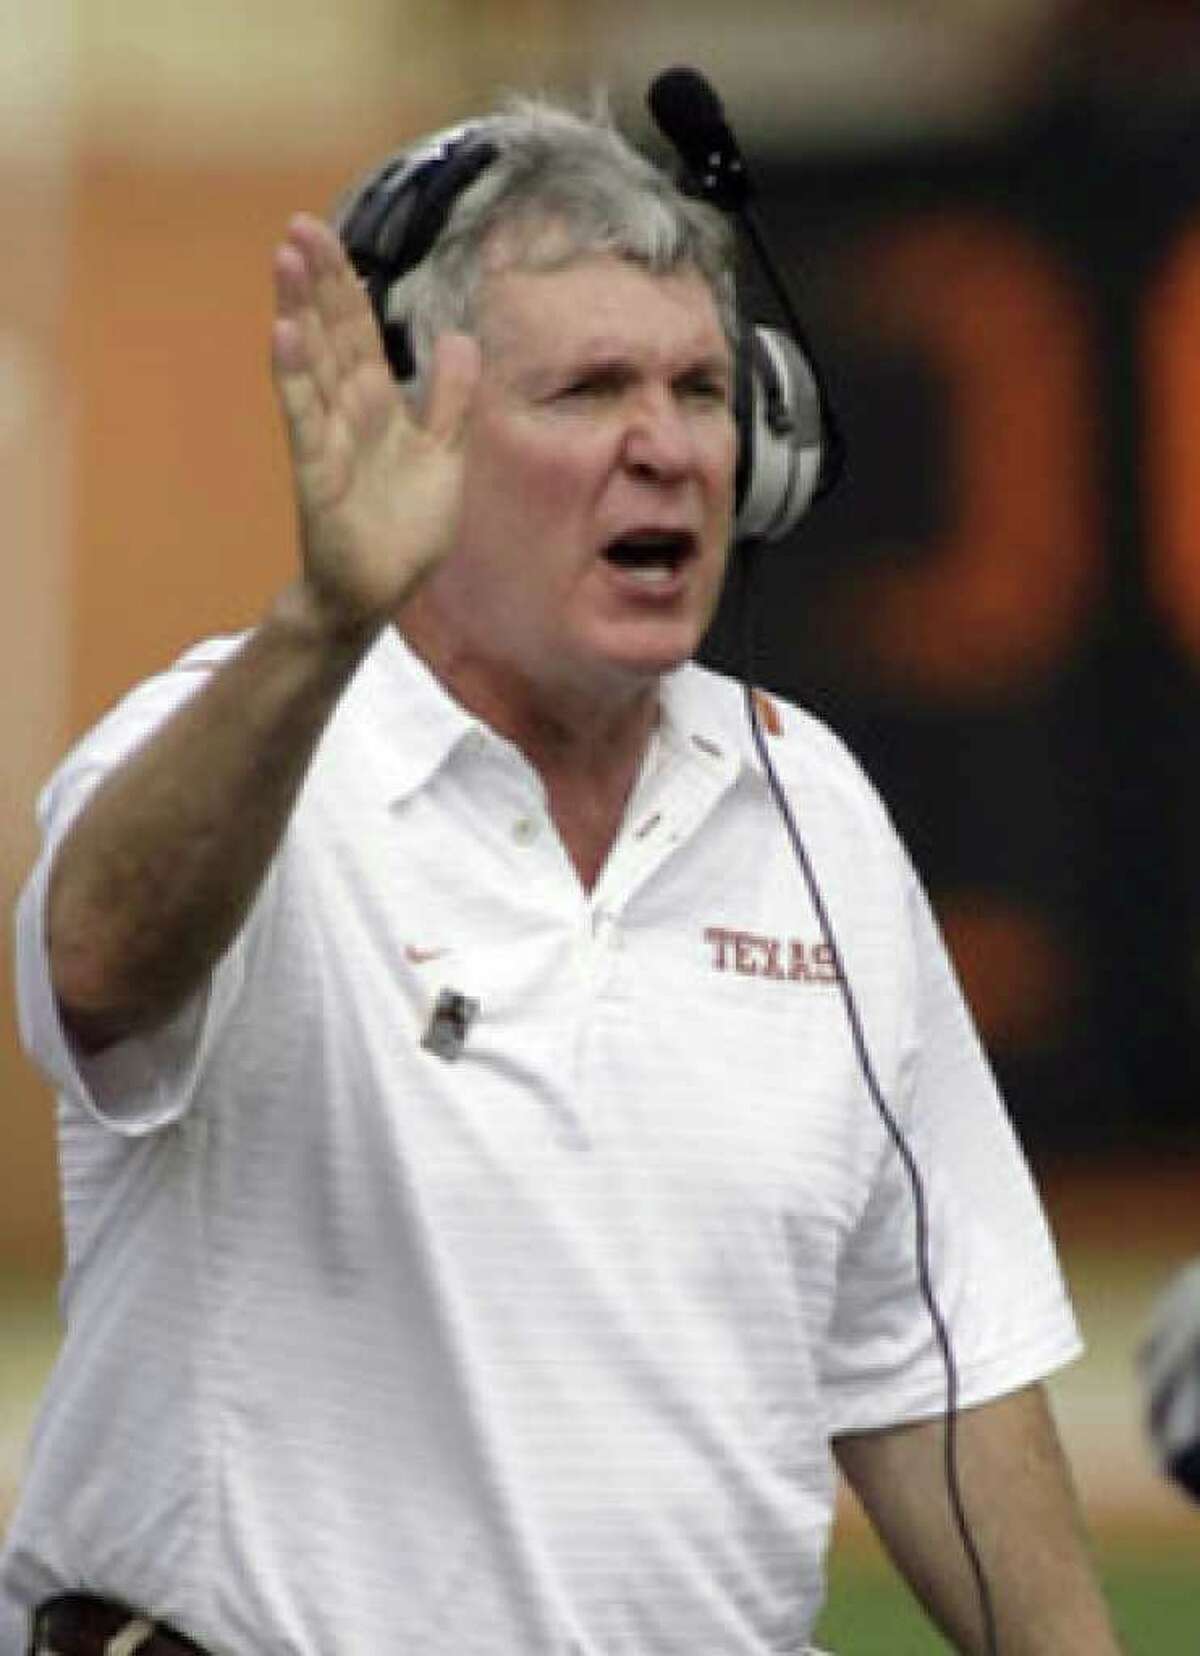 Mack Brown is trying to win his second national title as UT's head coach. He won his first in 2005.